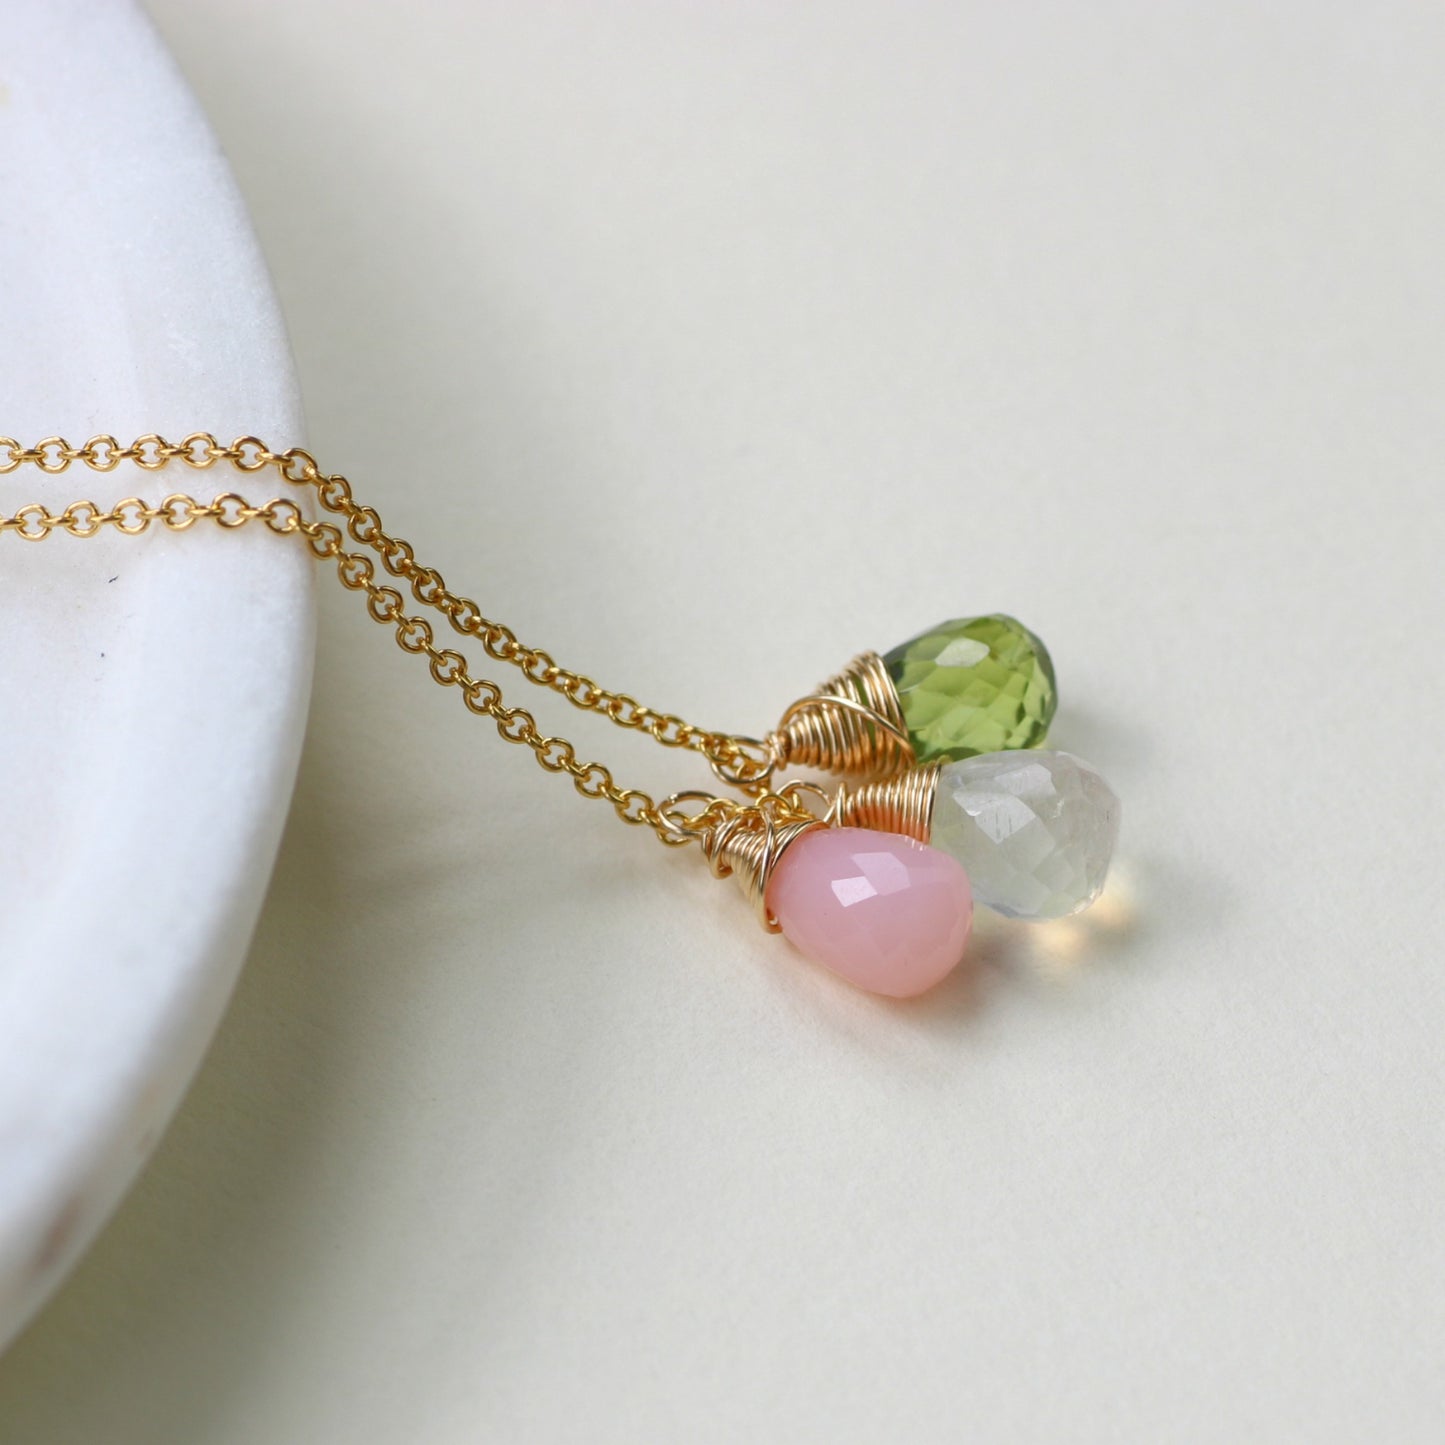 Birthstone Necklace - A Birthstone for Each of Us